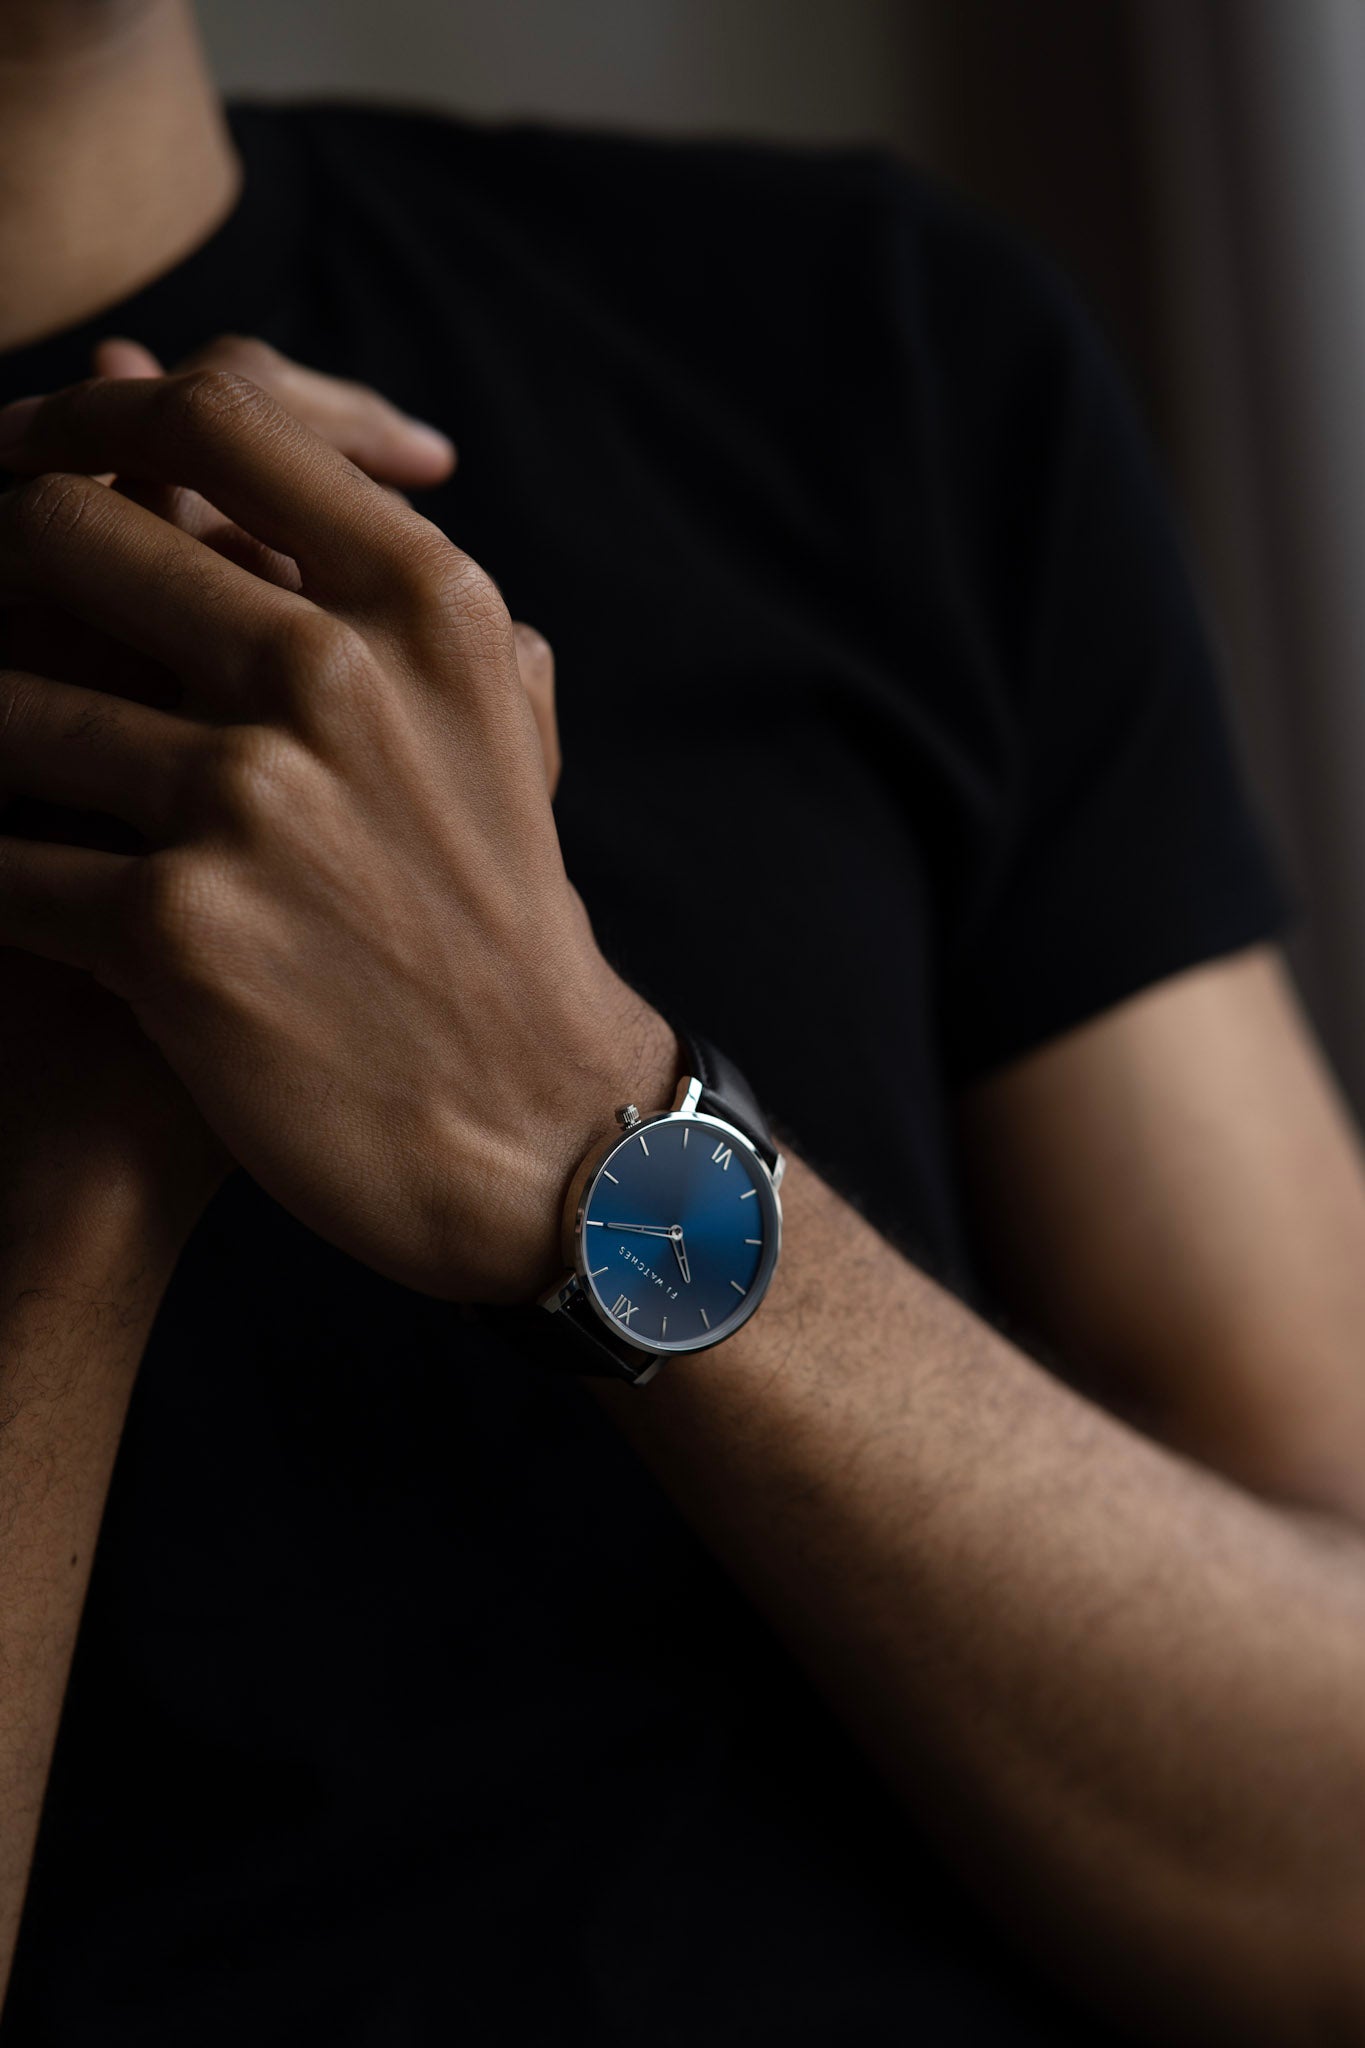 Discover Atlantic, a Five Jwlry men's watch with a 42mm blue dial, silver case and hands. This one is offered with a genuine leather strap in black or navy blue.